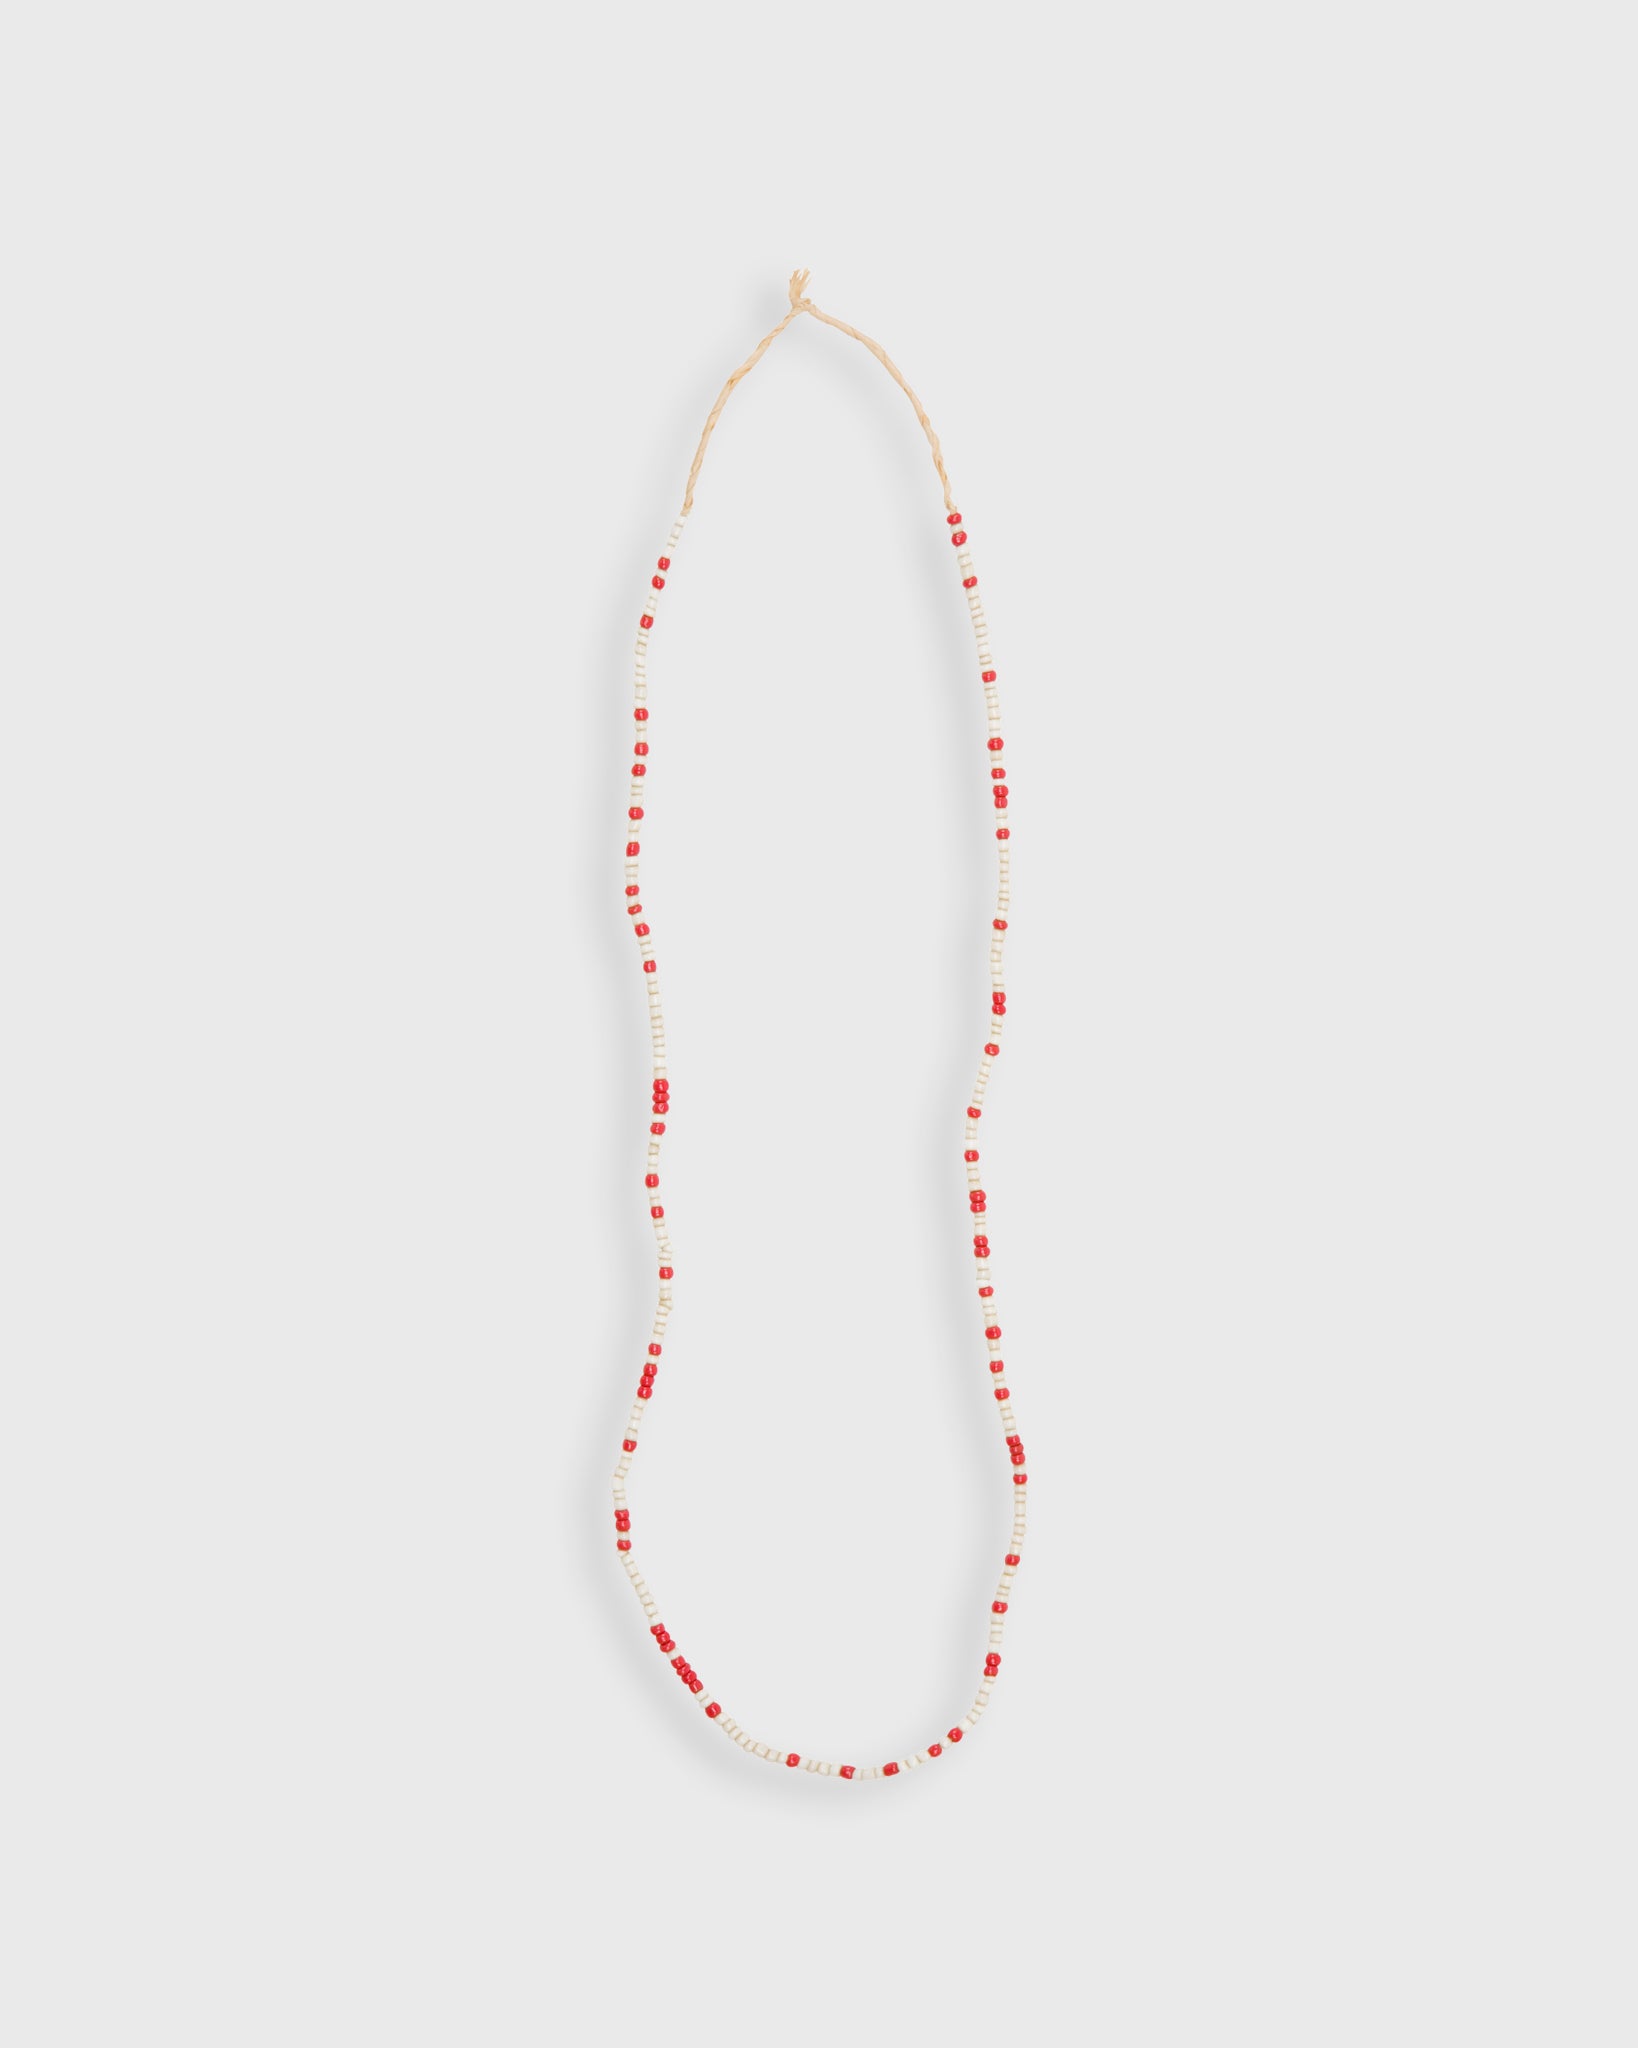 Tiny African Beads in Red/White